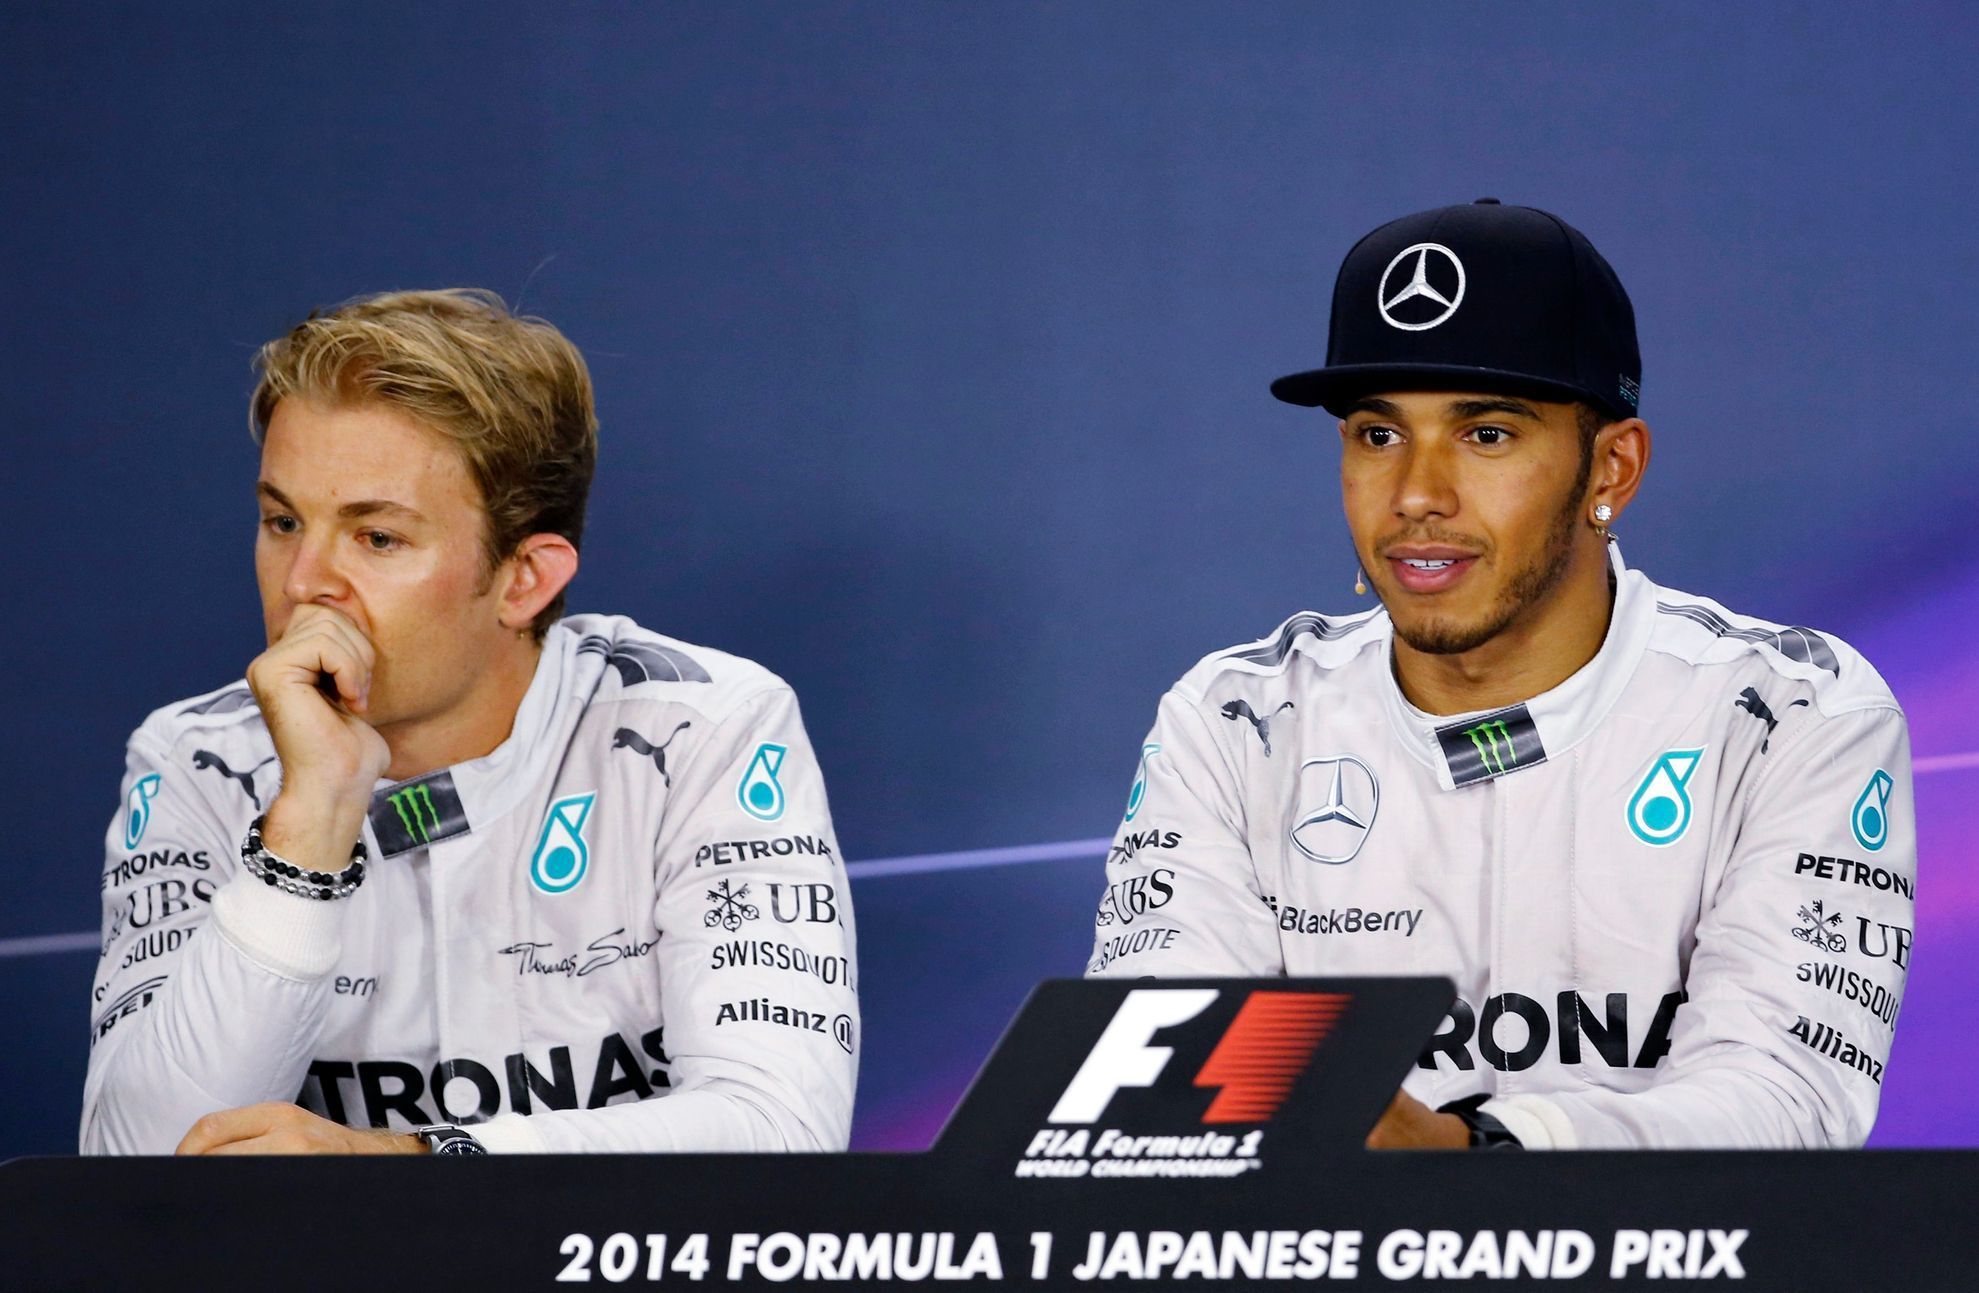 Mercedes Formula One driver Lewis Hamilton of Britain and teammate Nico Rosberg of Germany attend a news conference after the Japanese F1 Grand Prix at the Suzuka Circuit